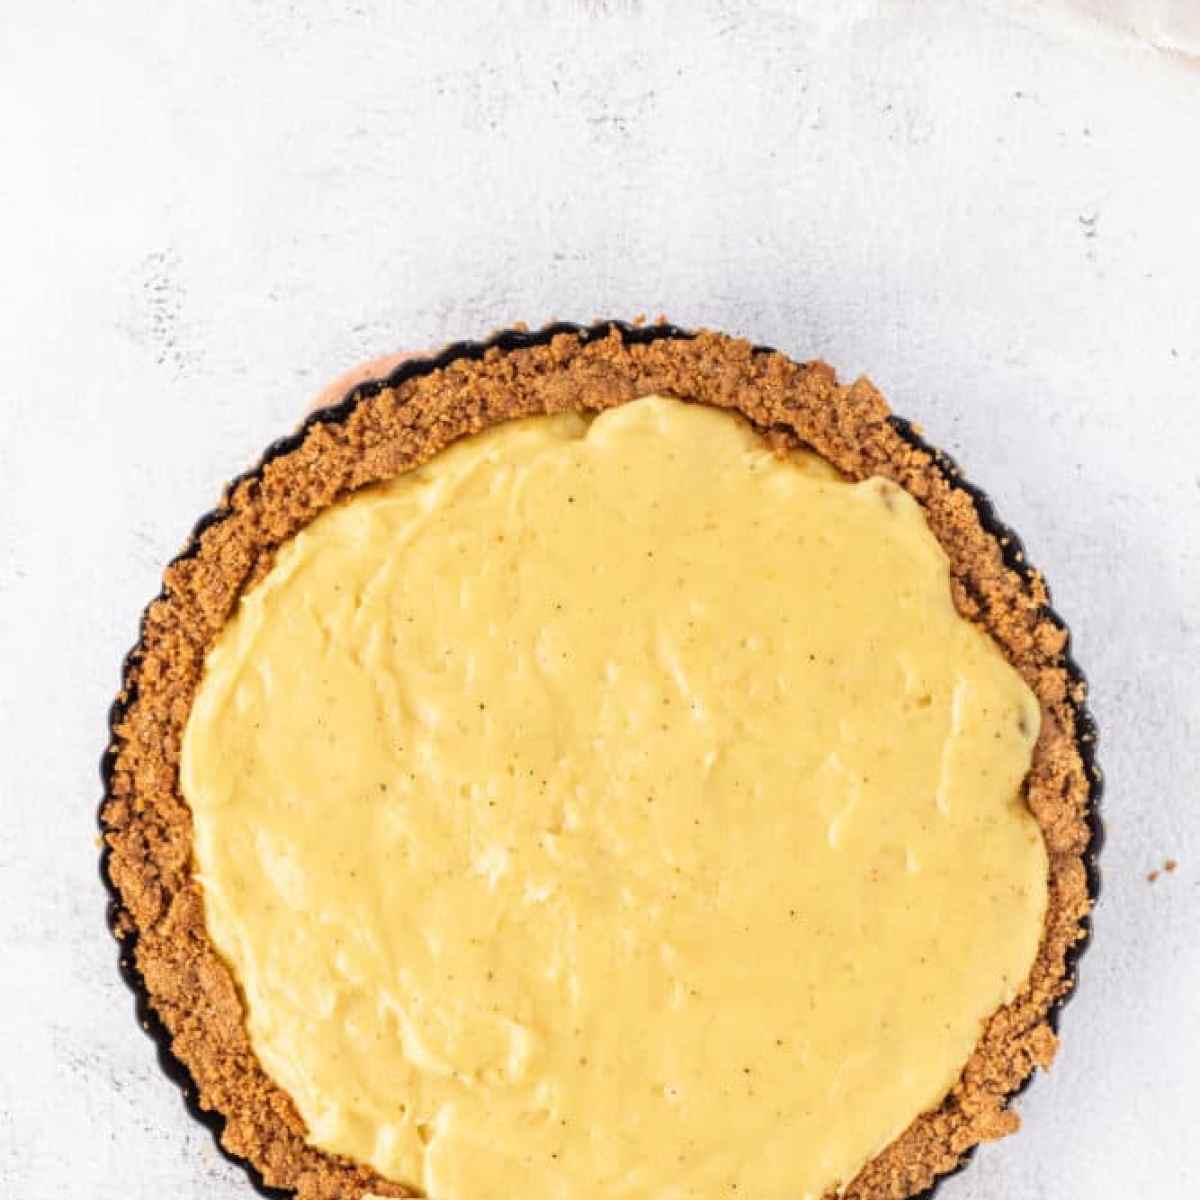 A yellow Eggnog Tart on a white surface.